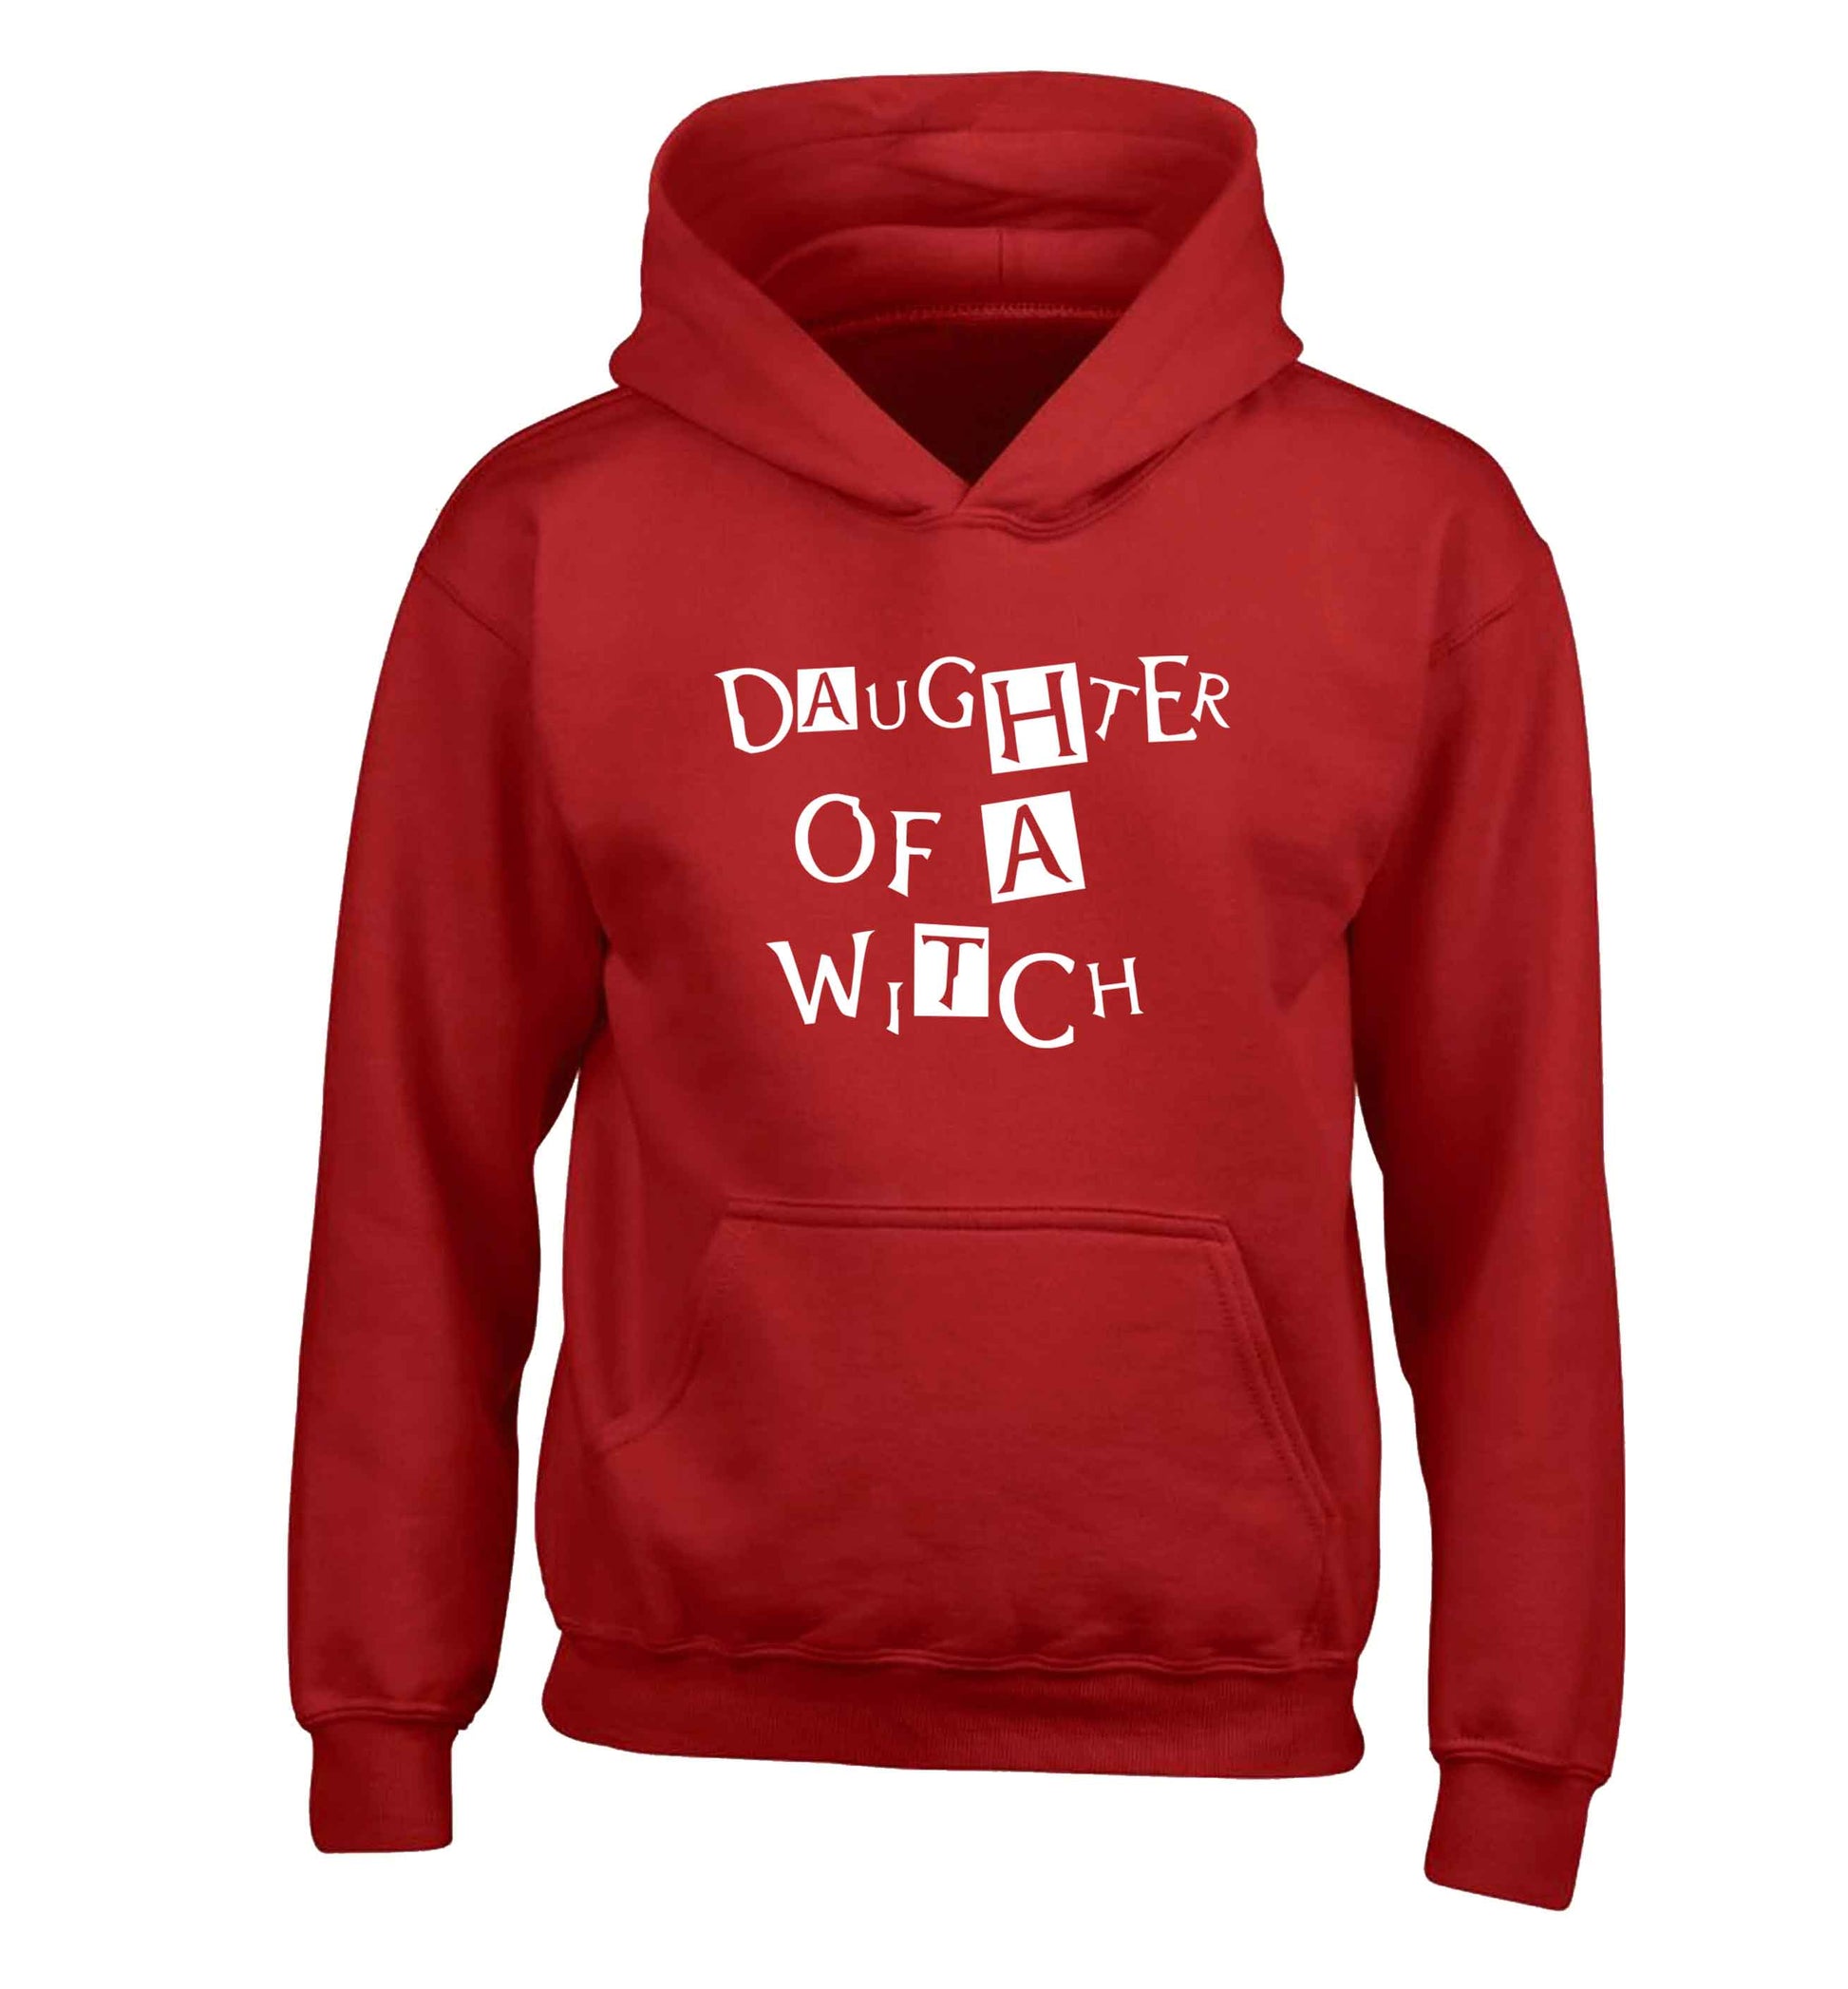 Daughter of a witch children's red hoodie 12-13 Years